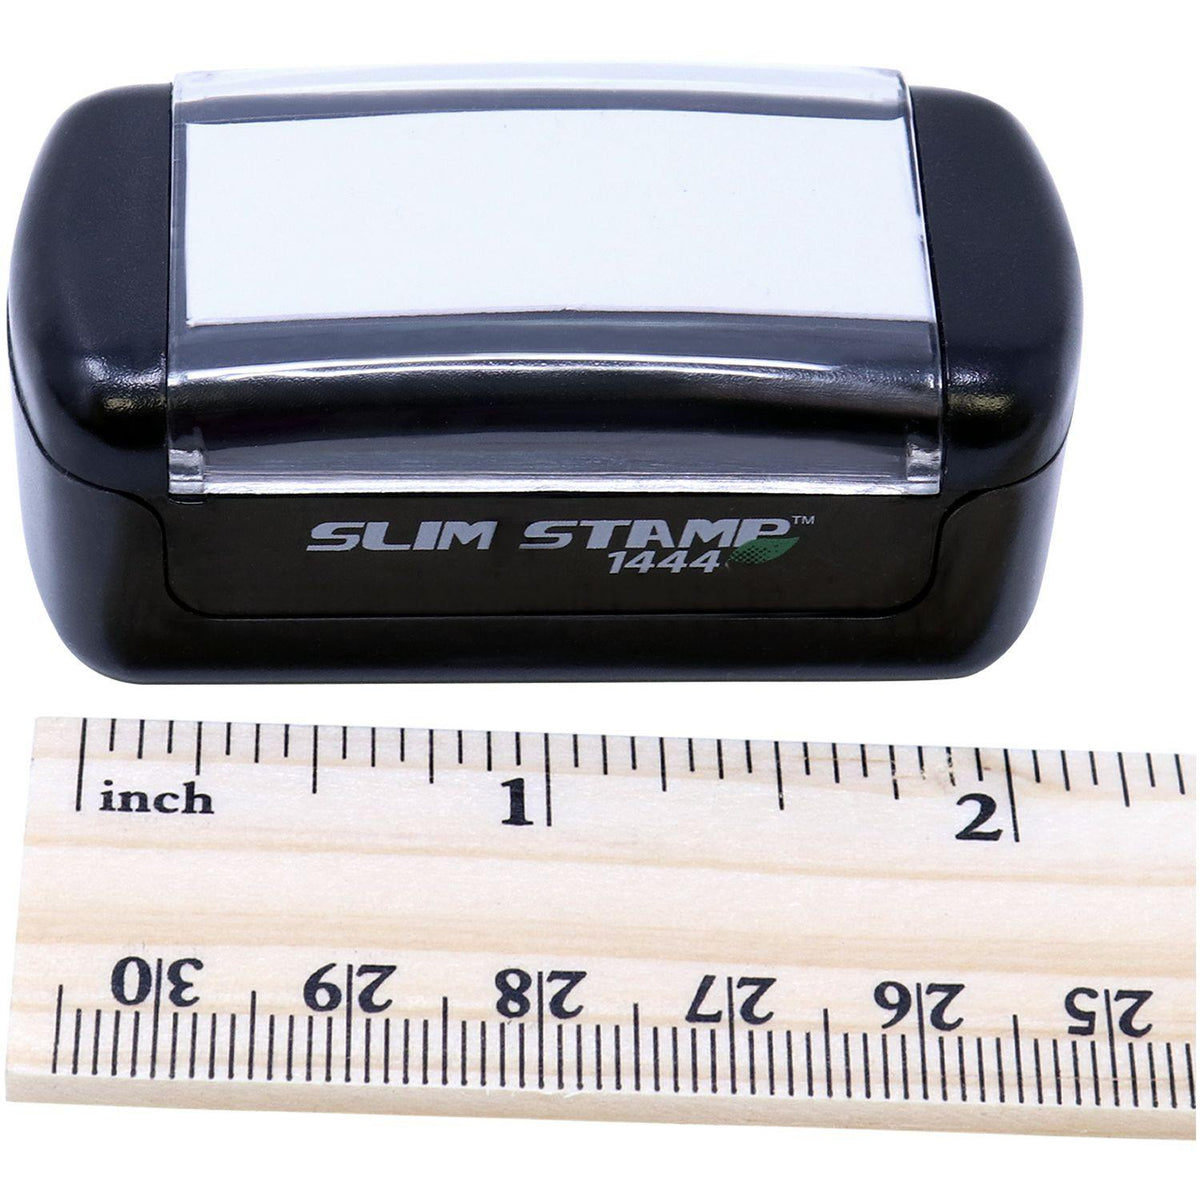 Slim Pre-Inked Benefits Assigned Stamp - Engineer Seal Stamps - Brand_Slim, Impression Size_Small, Stamp Type_Pre-Inked Stamp, Type of Use_Medical Office, Type of Use_Office, Type of Use_Professional